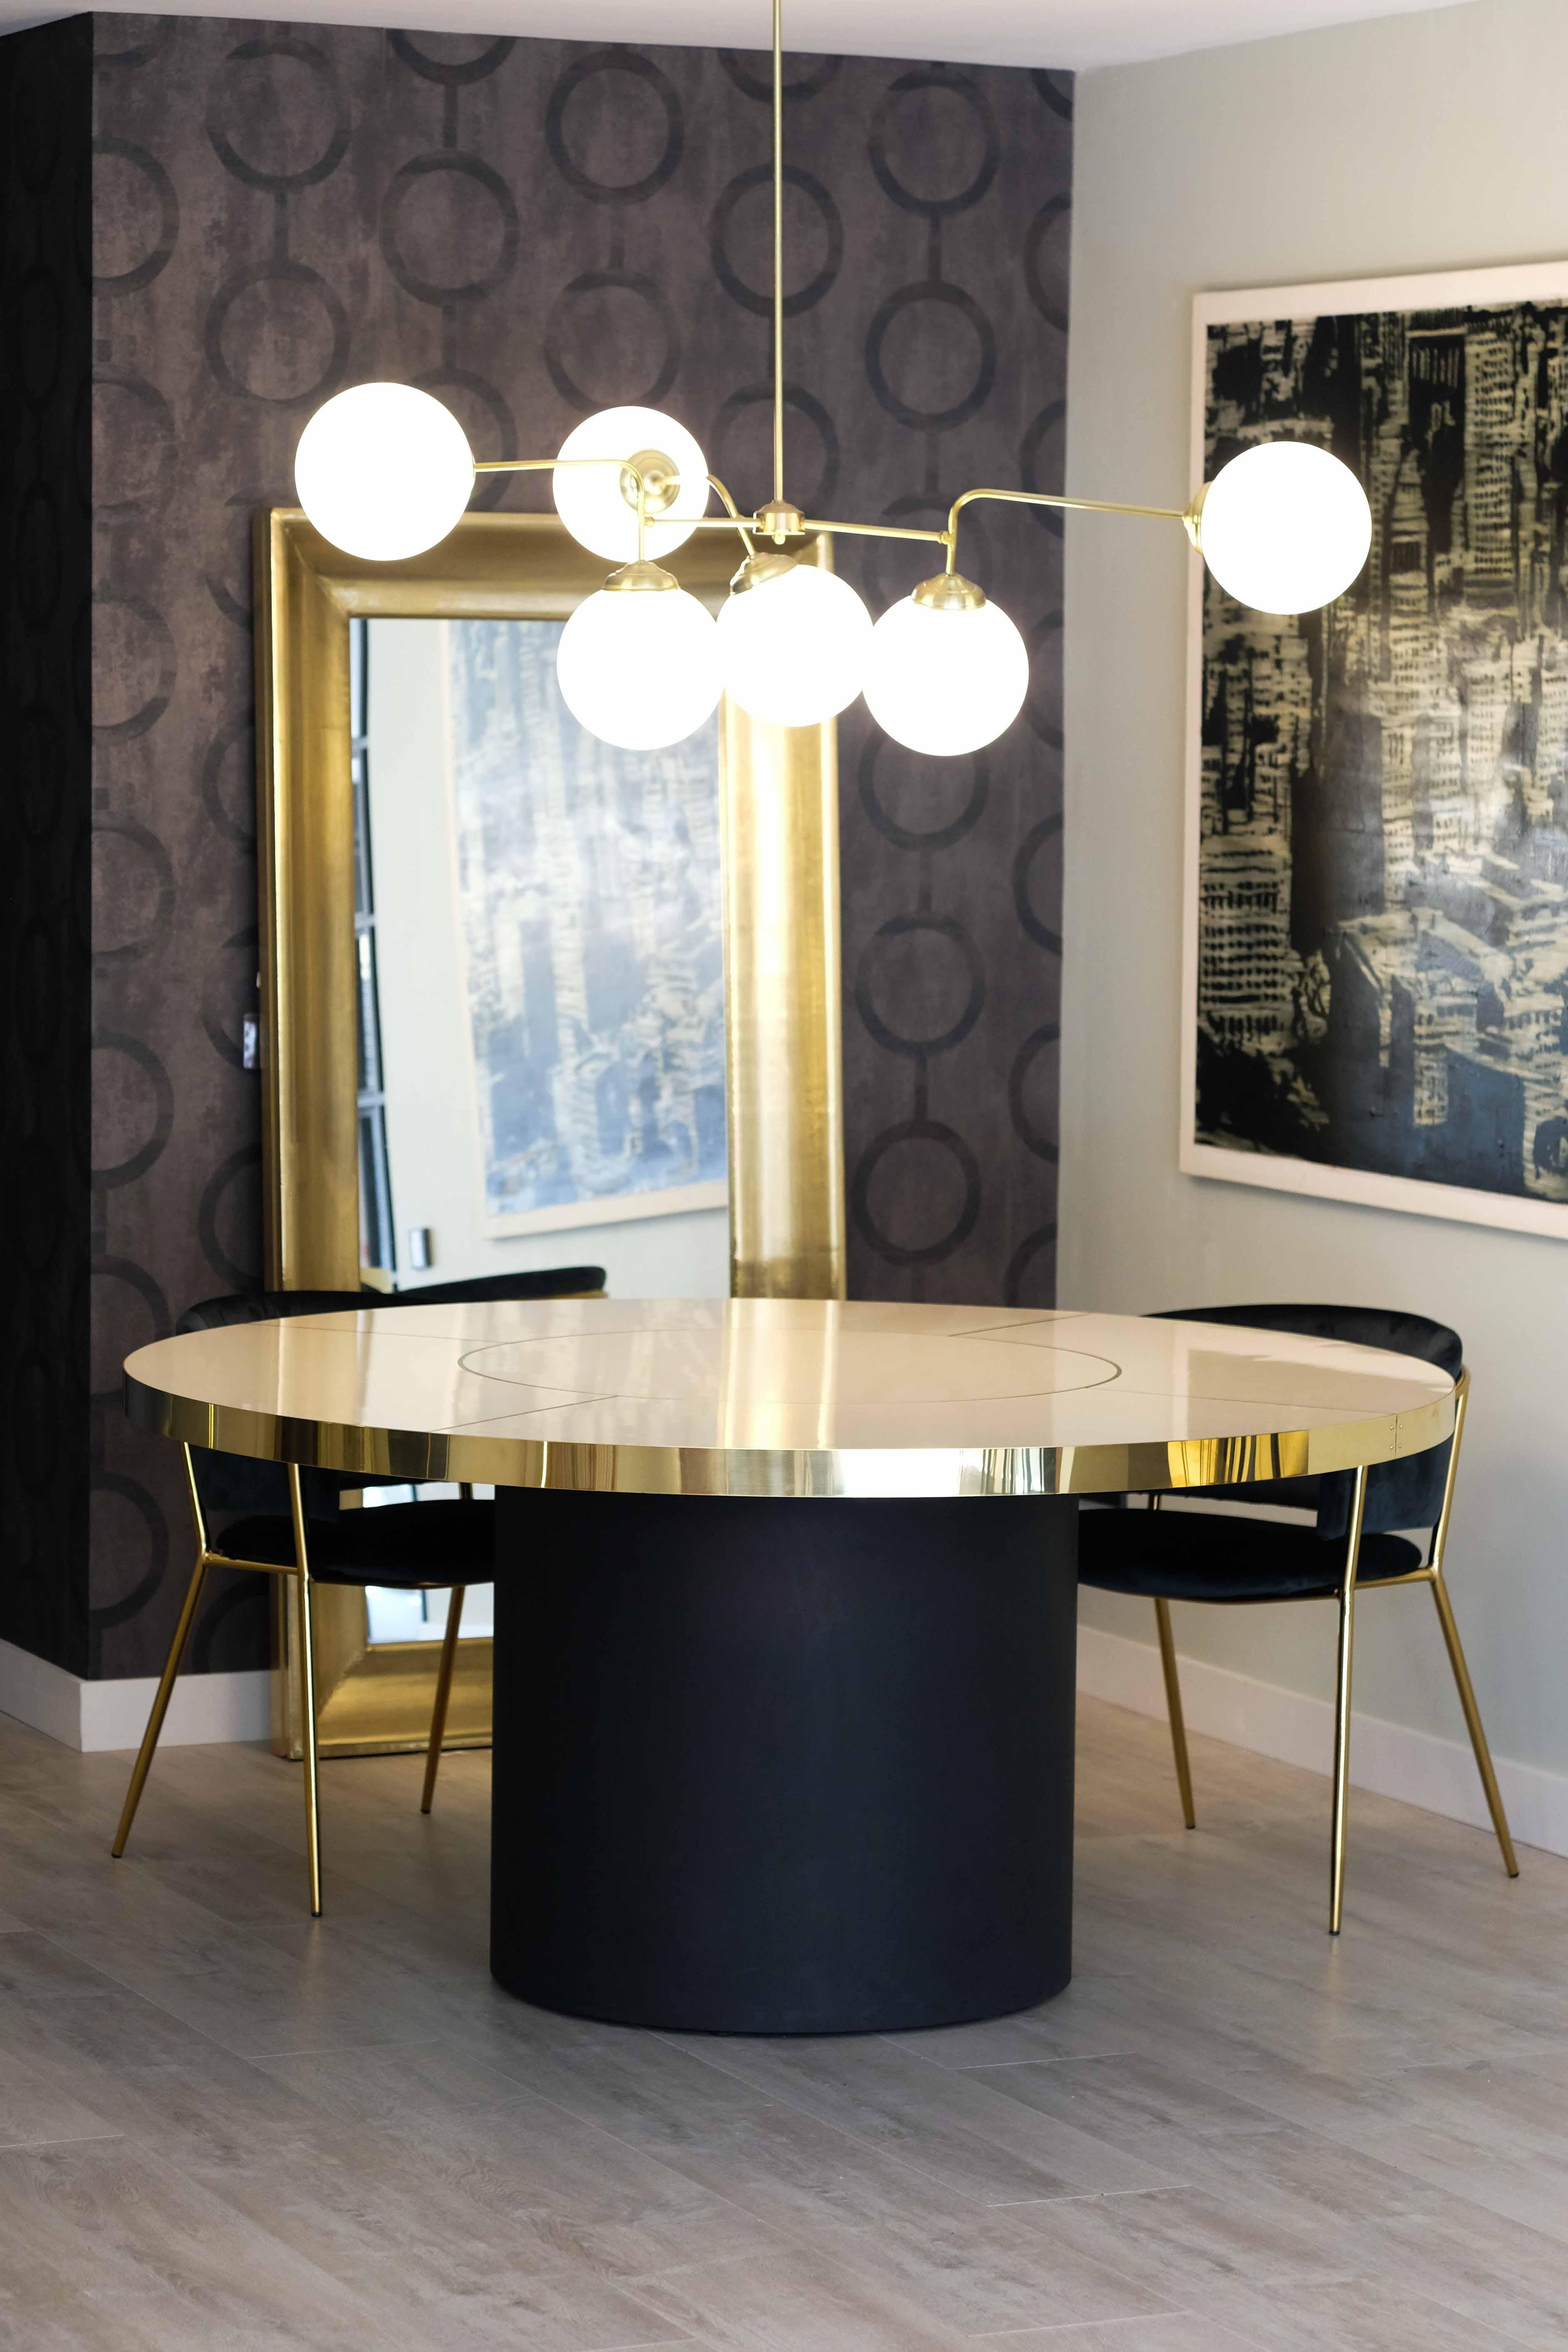 Retro Design Round Dining Table Palm Springs Style High Gloss Laminated & Brass Details Extra Large Size

Discover our incredible collection of retro-style design tables inspired by the iconic decoration of the 1950s, 60s, and 70s of Palm Springs